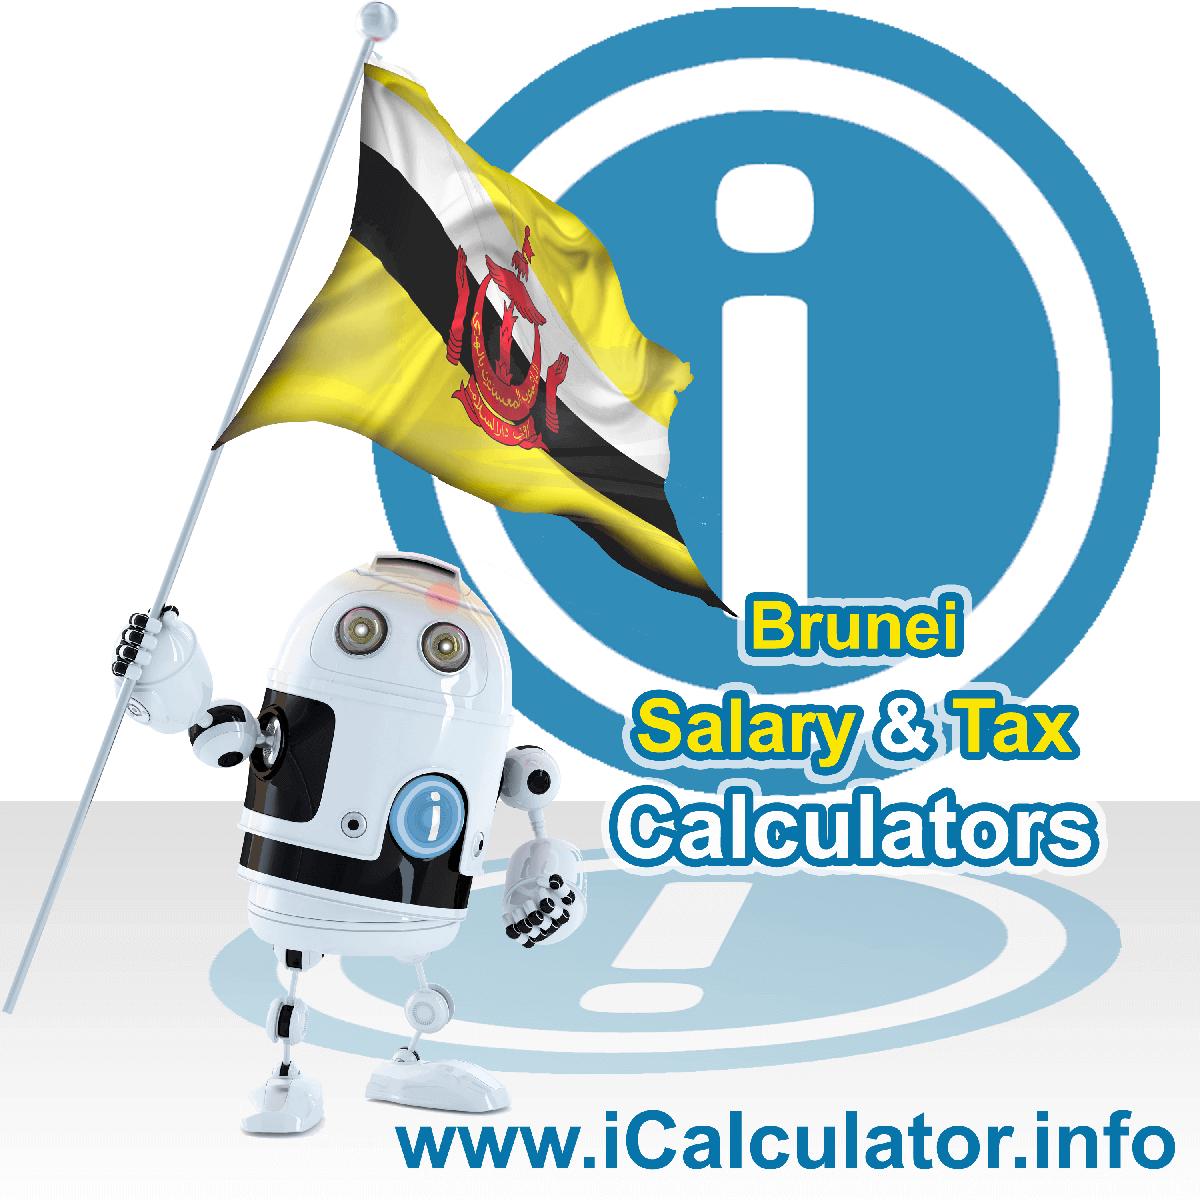 Brunei Darussalam Salary Calculator. This image shows the Brunei Darussalamese flag and information relating to the tax formula for the Brunei Darussalam Tax Calculator